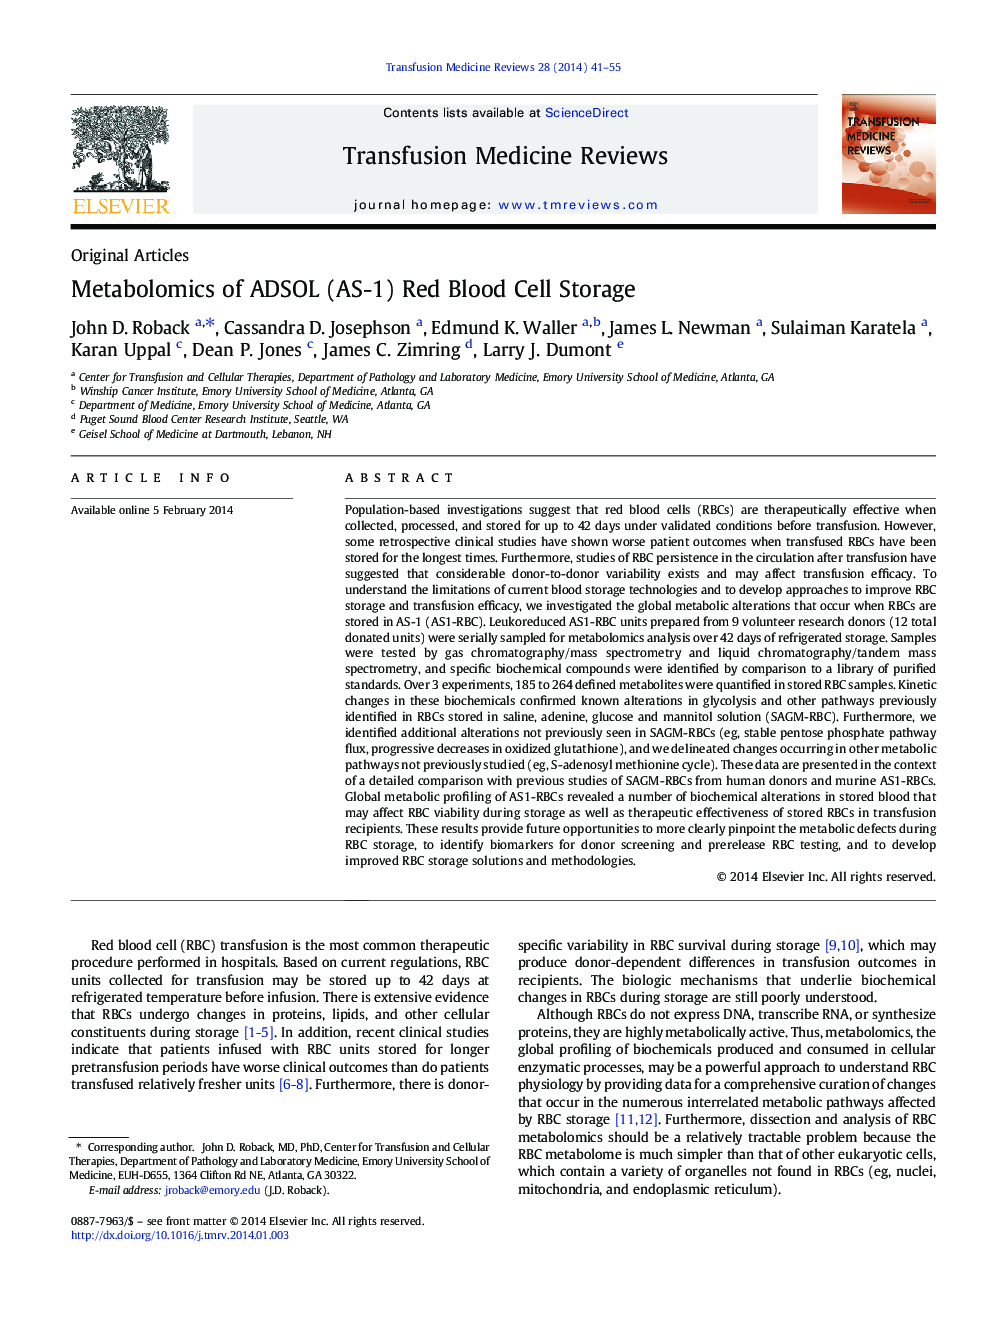 Metabolomics of ADSOL (AS-1) Red Blood Cell Storage